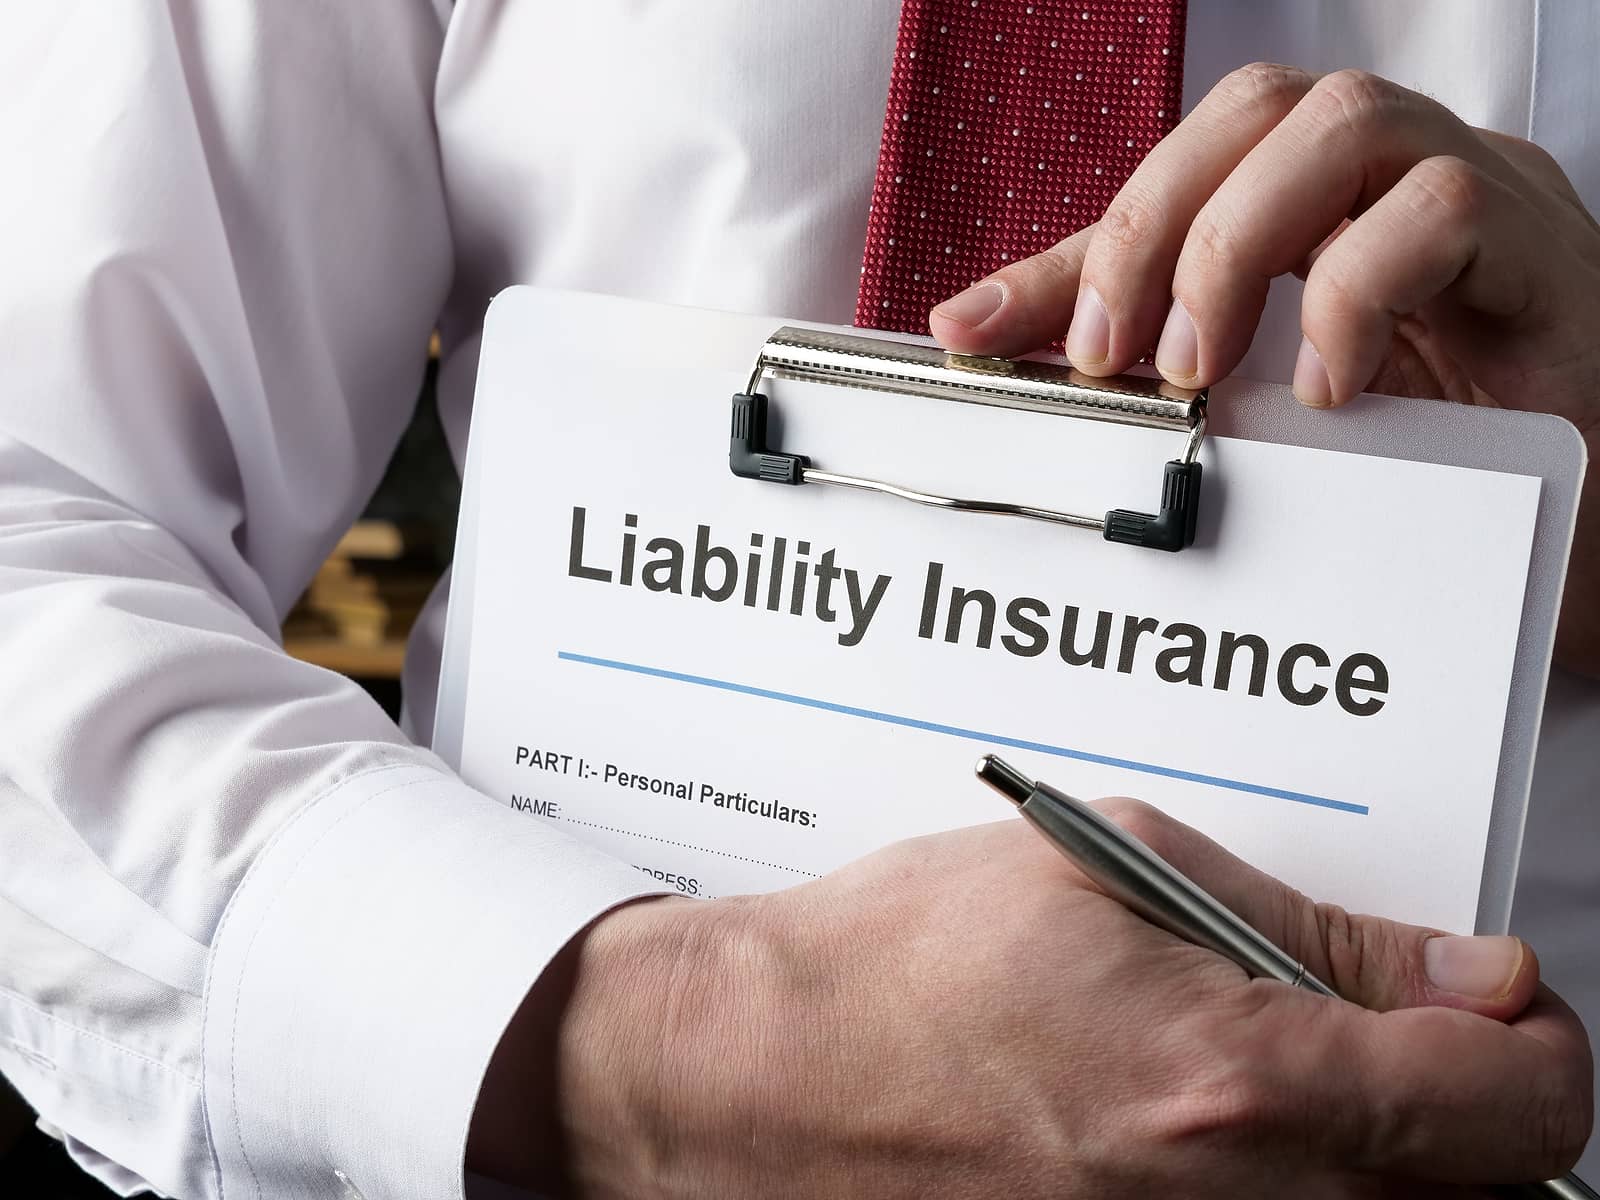 Liability Insurance: What You Need To Know